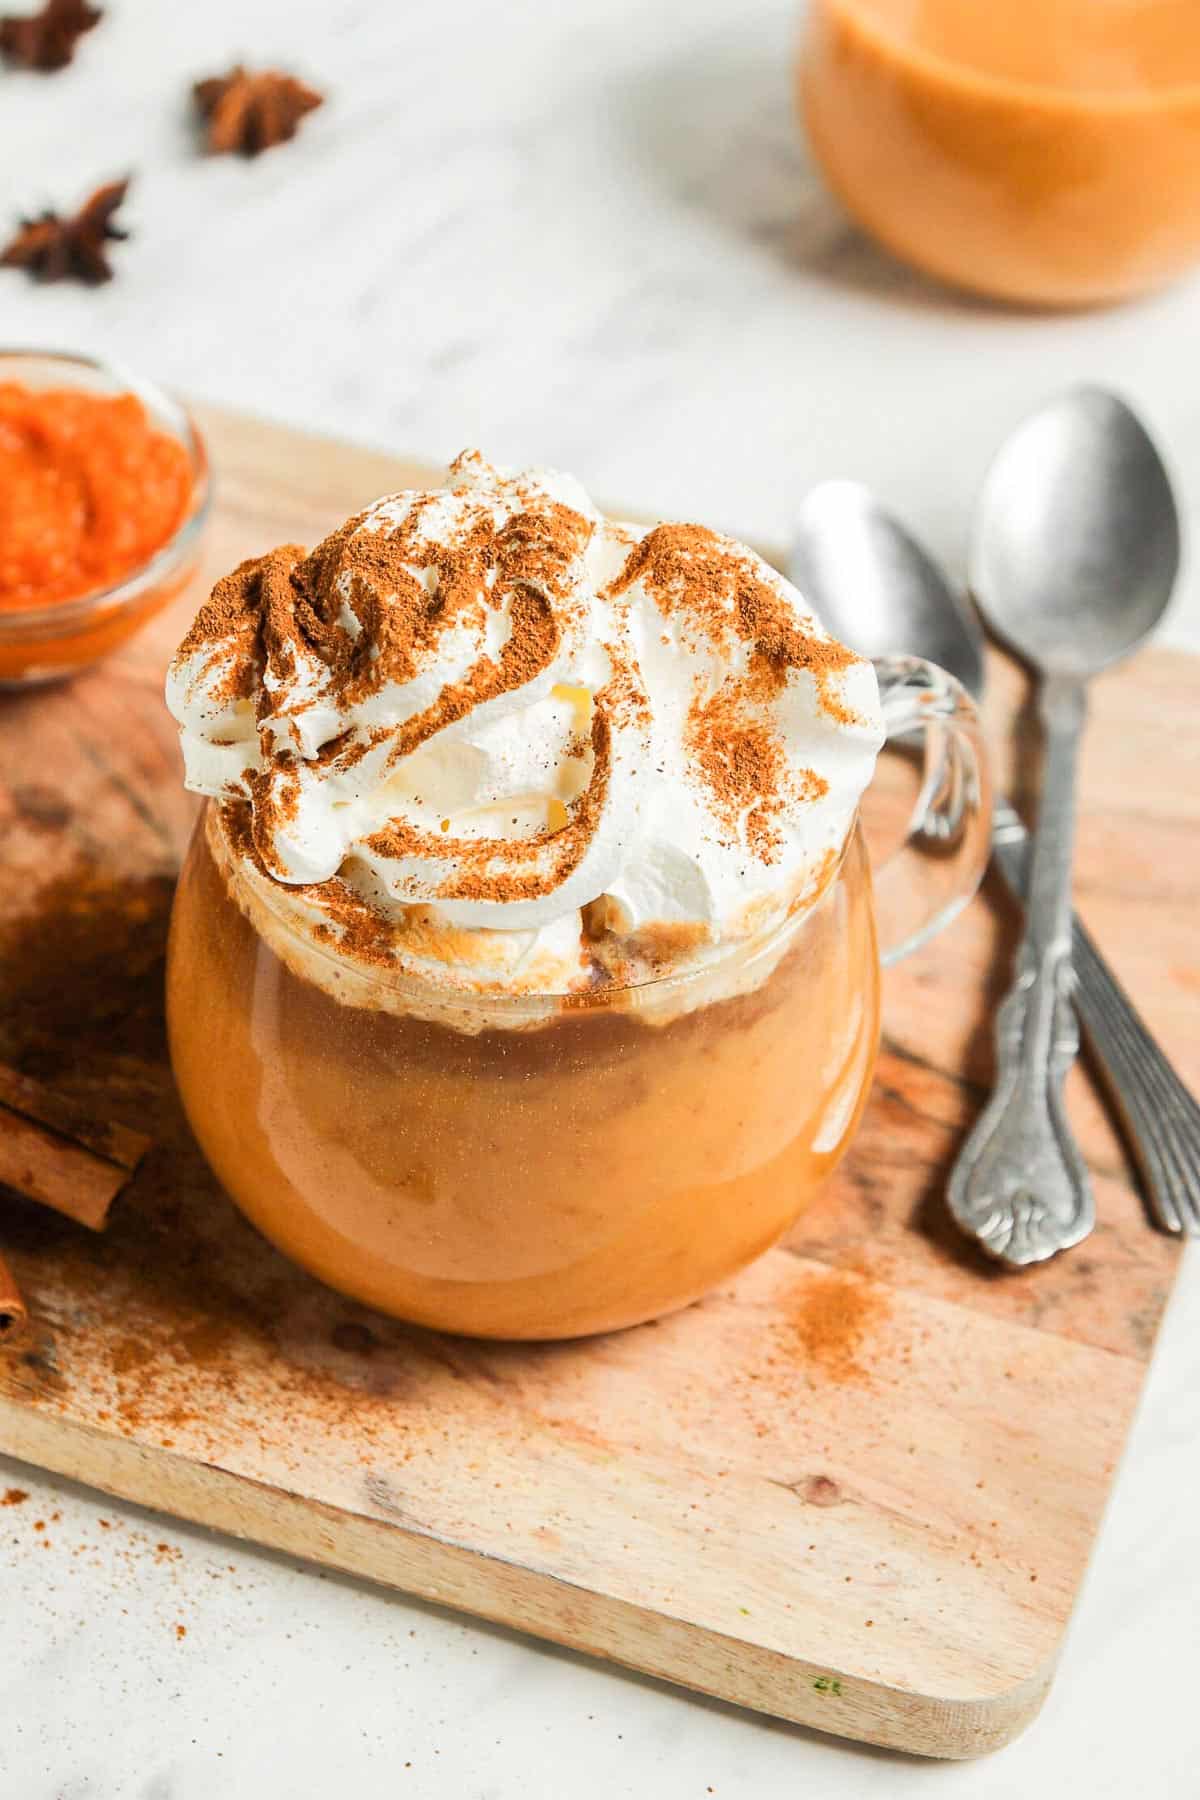 a clear glass mug with a pumpkin spice latte, topped with whipped cream and a sprinkle of pumpkin pie spice